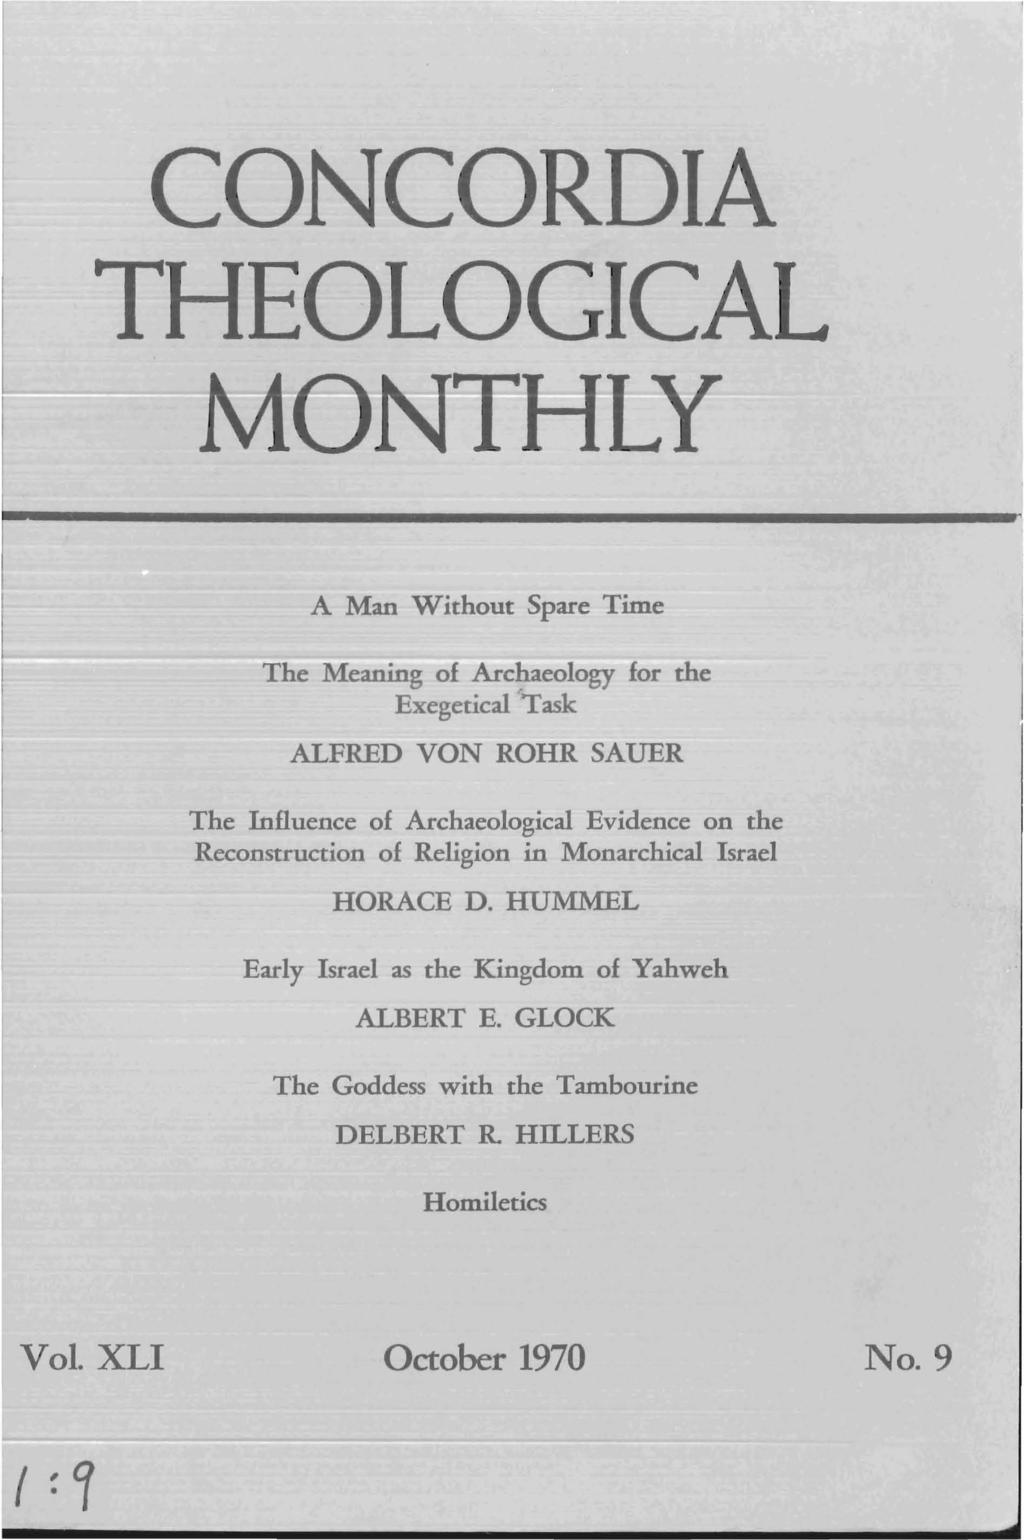 CONCORDIA THEOLOGICAL MONIHty A Man Without Spare Time The Meaning of Archaeology for the Exegetical 'Task ALFRED VON ROHR SAUER The Influence of Archaeological Evidence on the Reconstruction